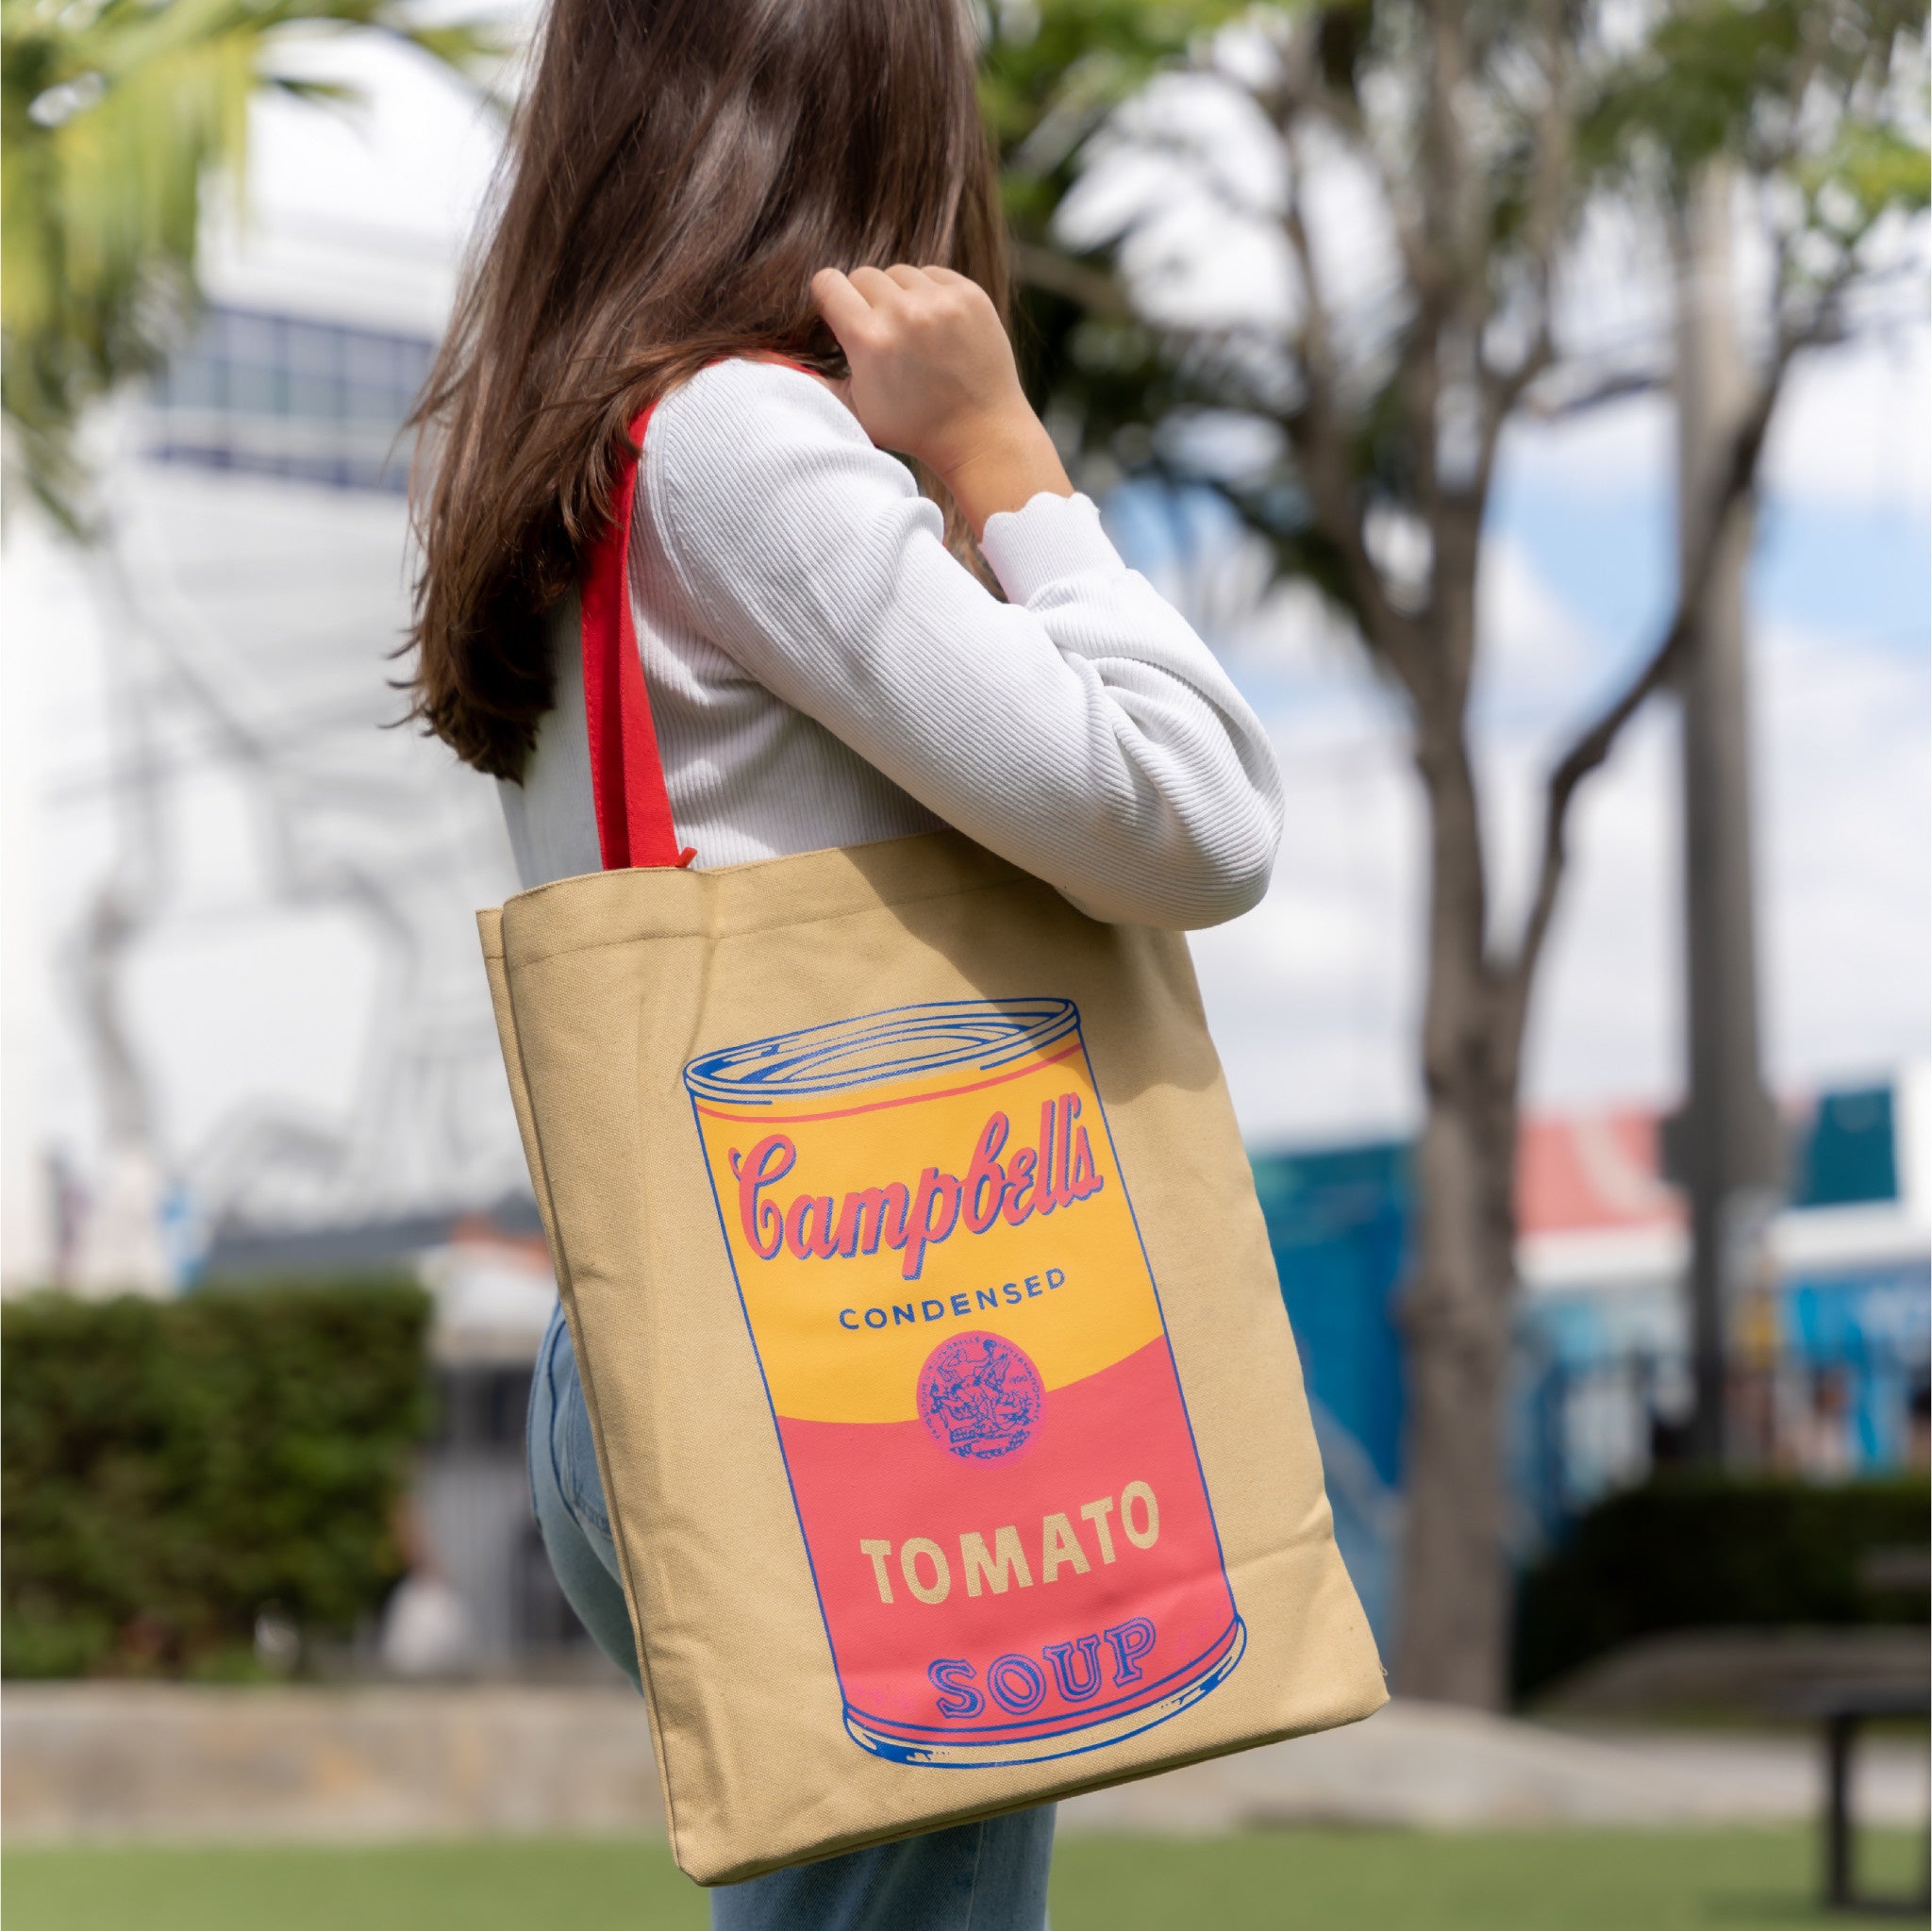 Andy Warhol Campbell's Soup Tote Bag – The Wynwood Walls Shop